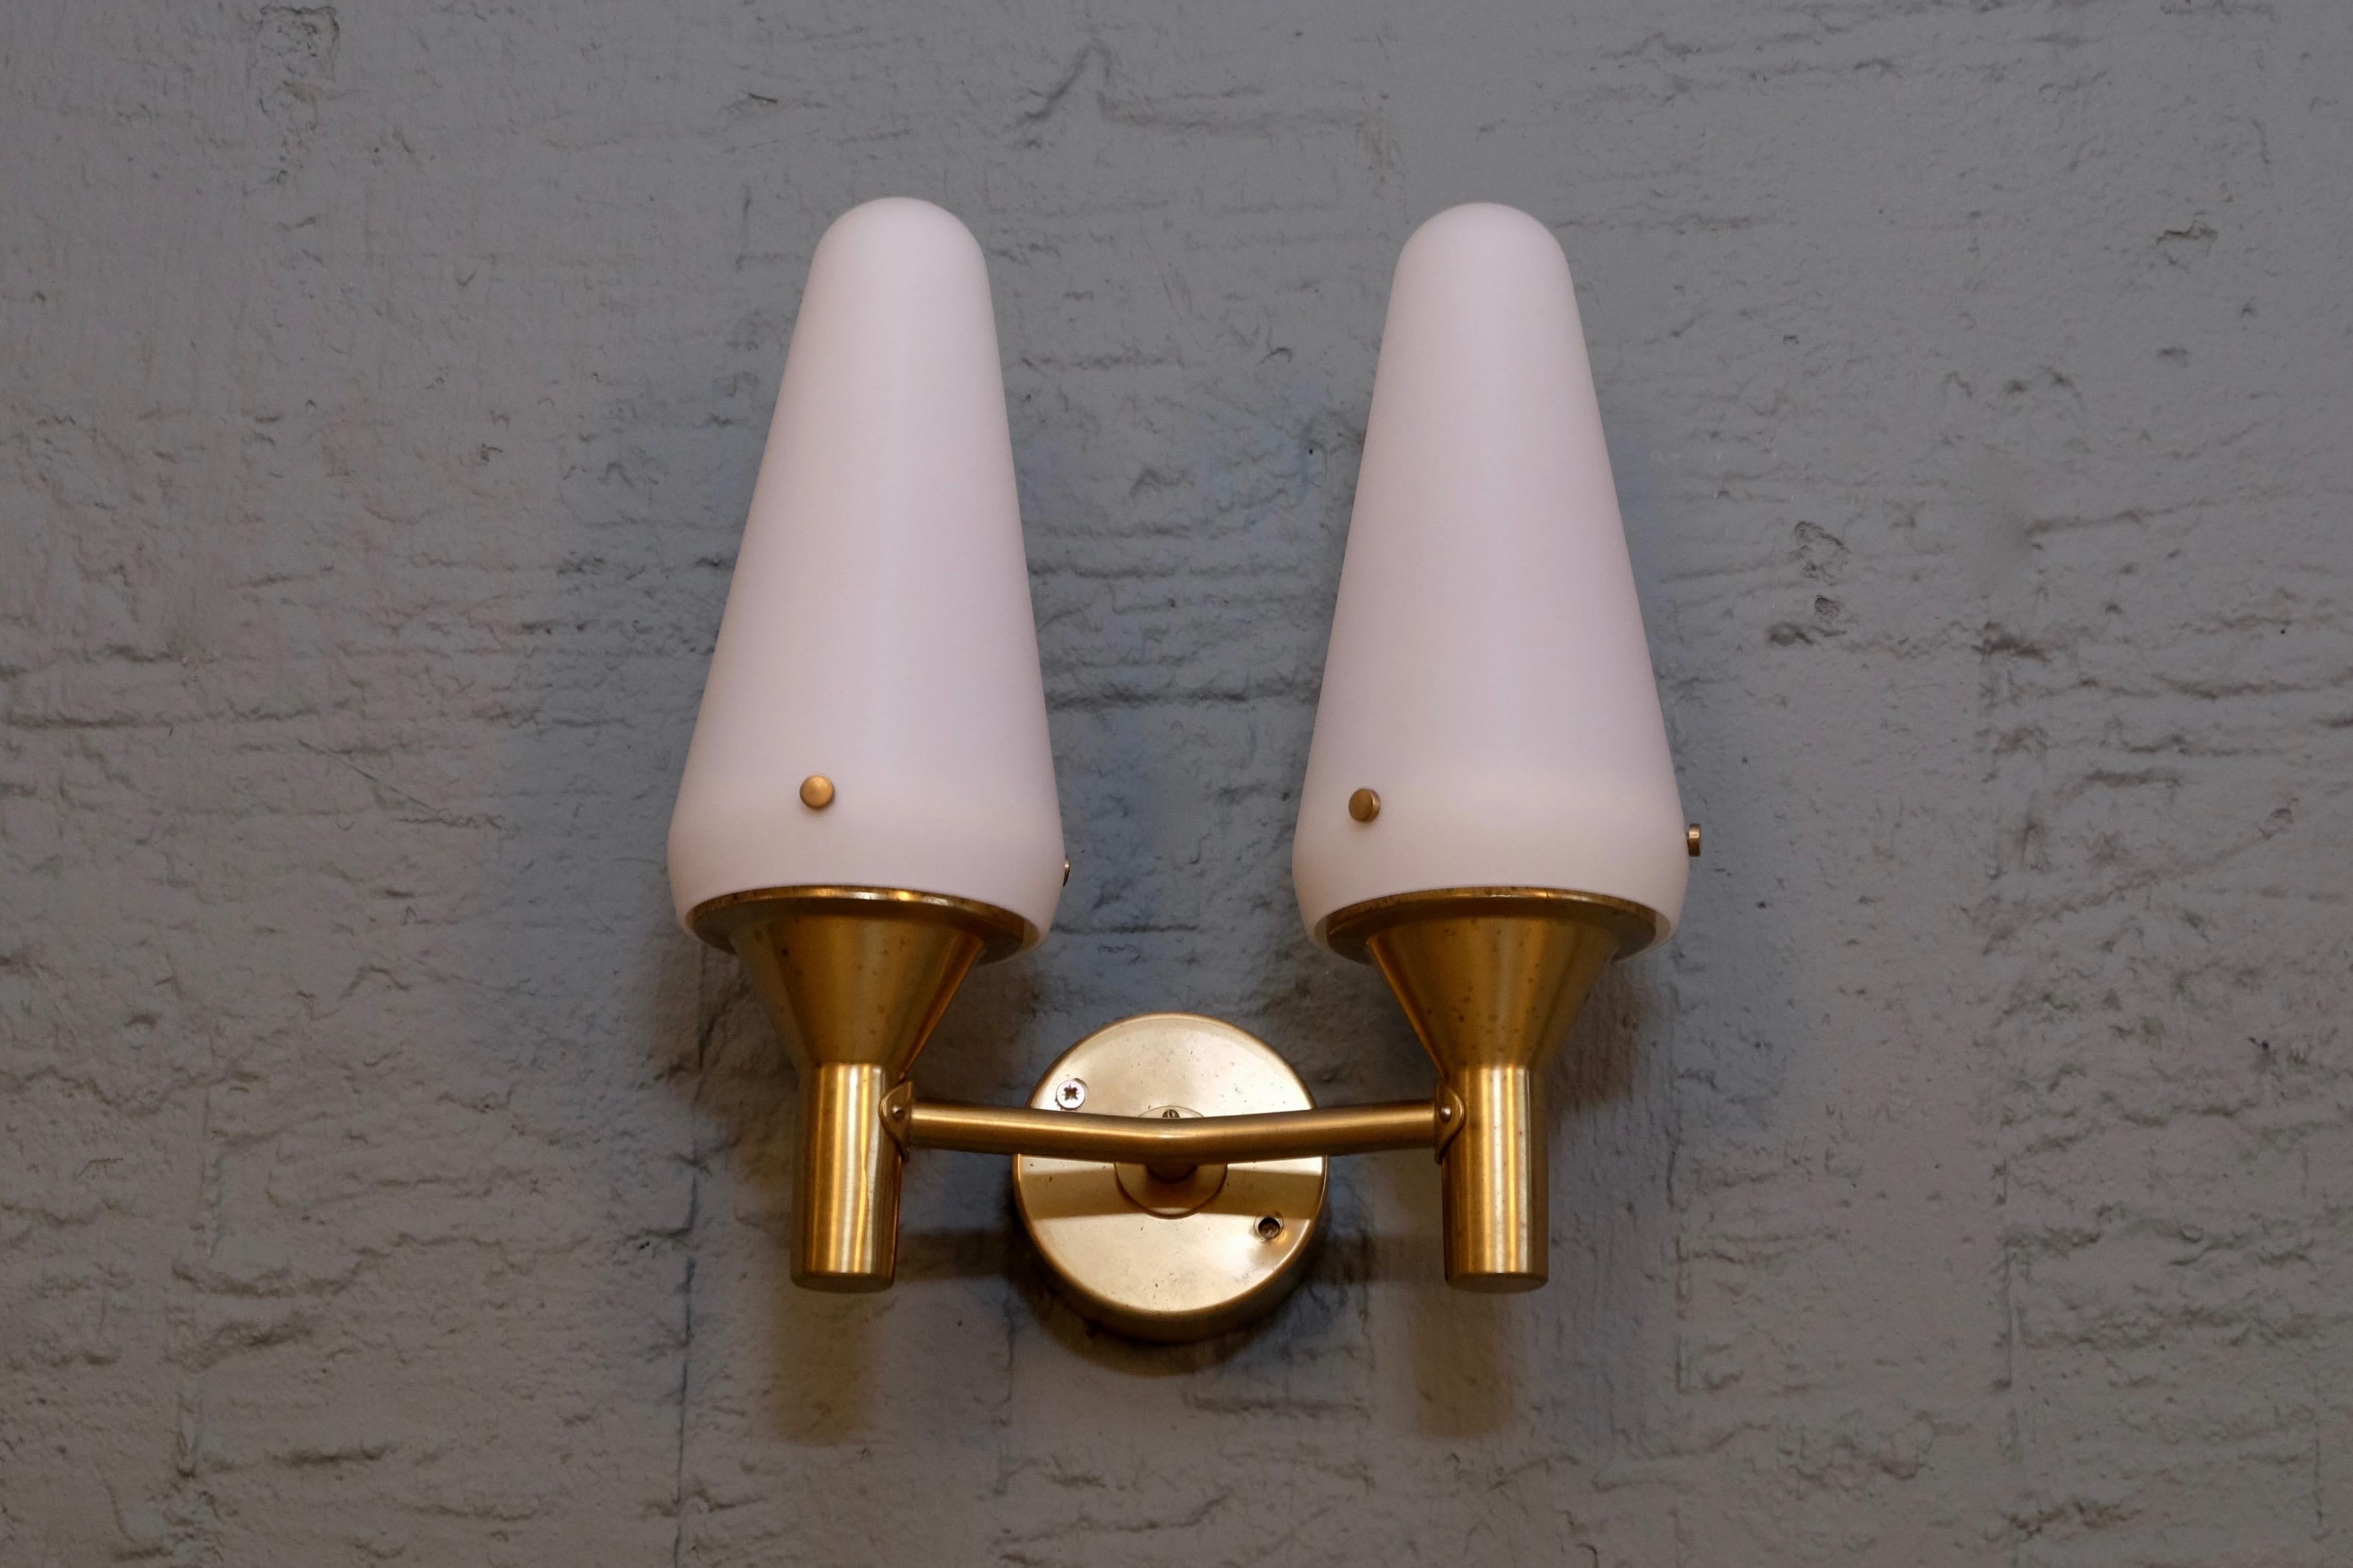 Rare wall lamps model S-1554 designed by Hans-Agne Jakobsson
Produced by Hans-Agne Jakobsson in Markaryd, Sweden, 1950s
Brass and white opal glass.

Quantity: 4 available, listed price is for one (1) wall lamp.